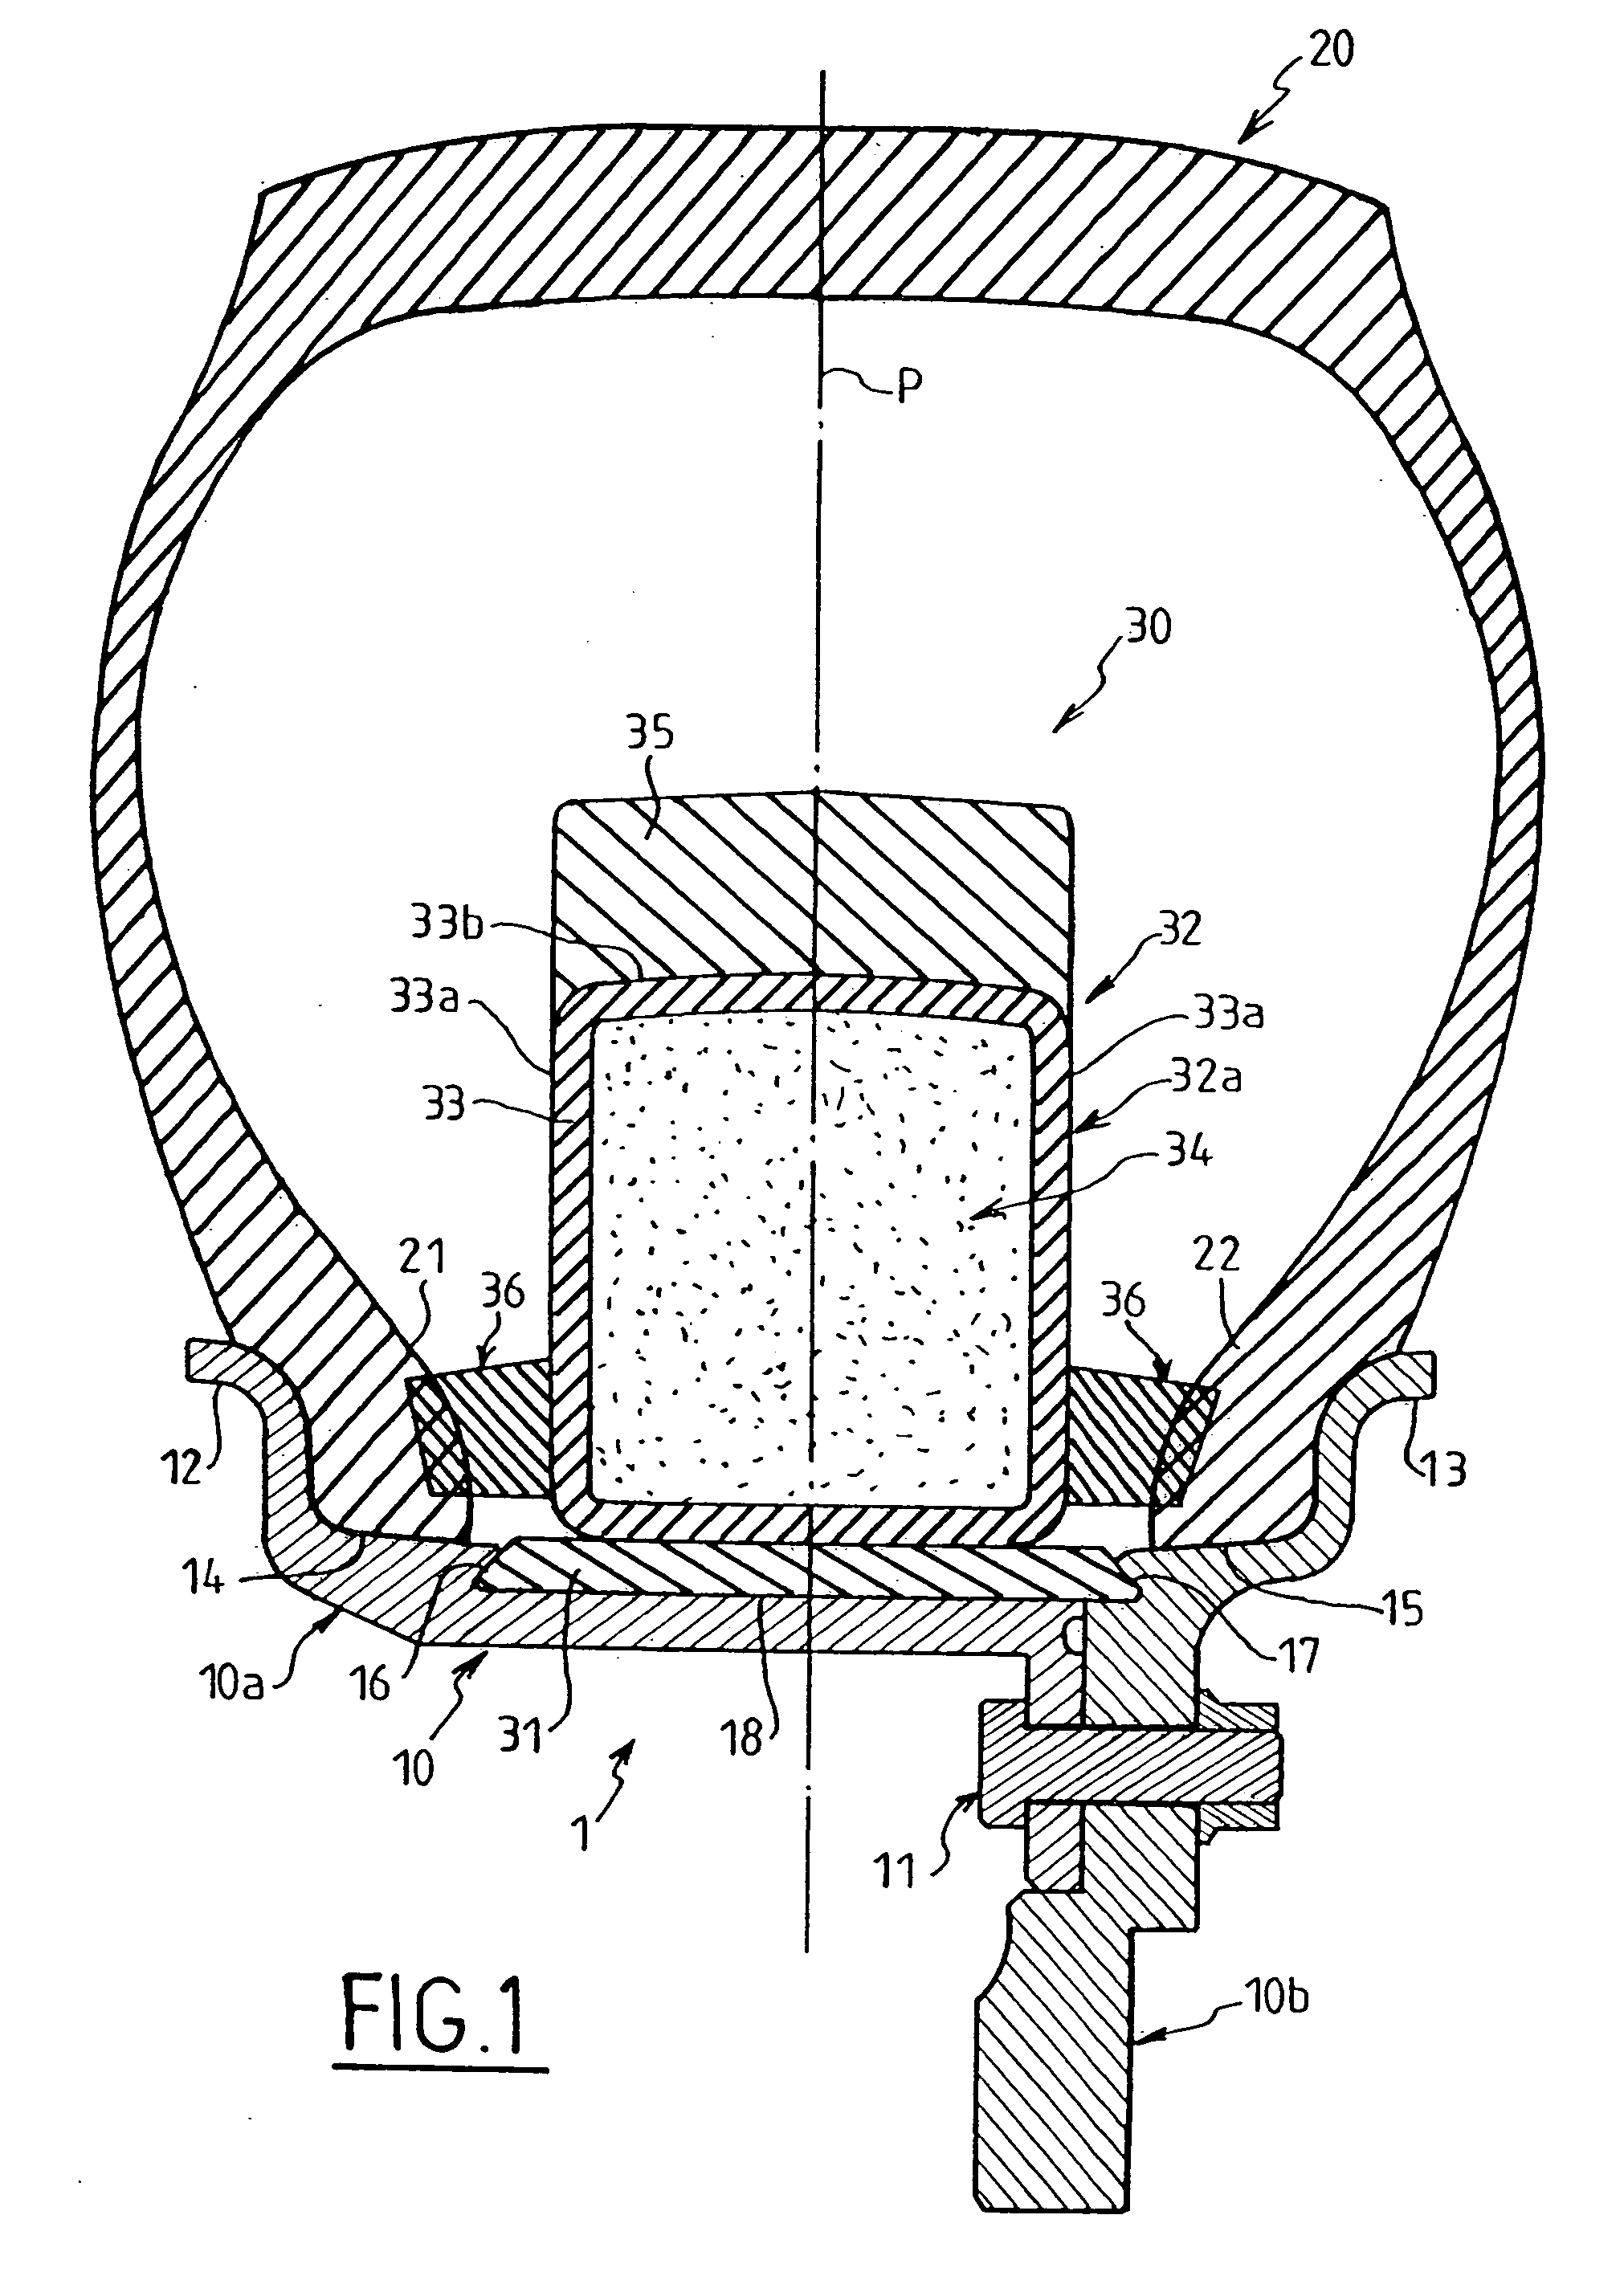 Runflat device for a motor vehicle, and a mounted assembly incorporating it